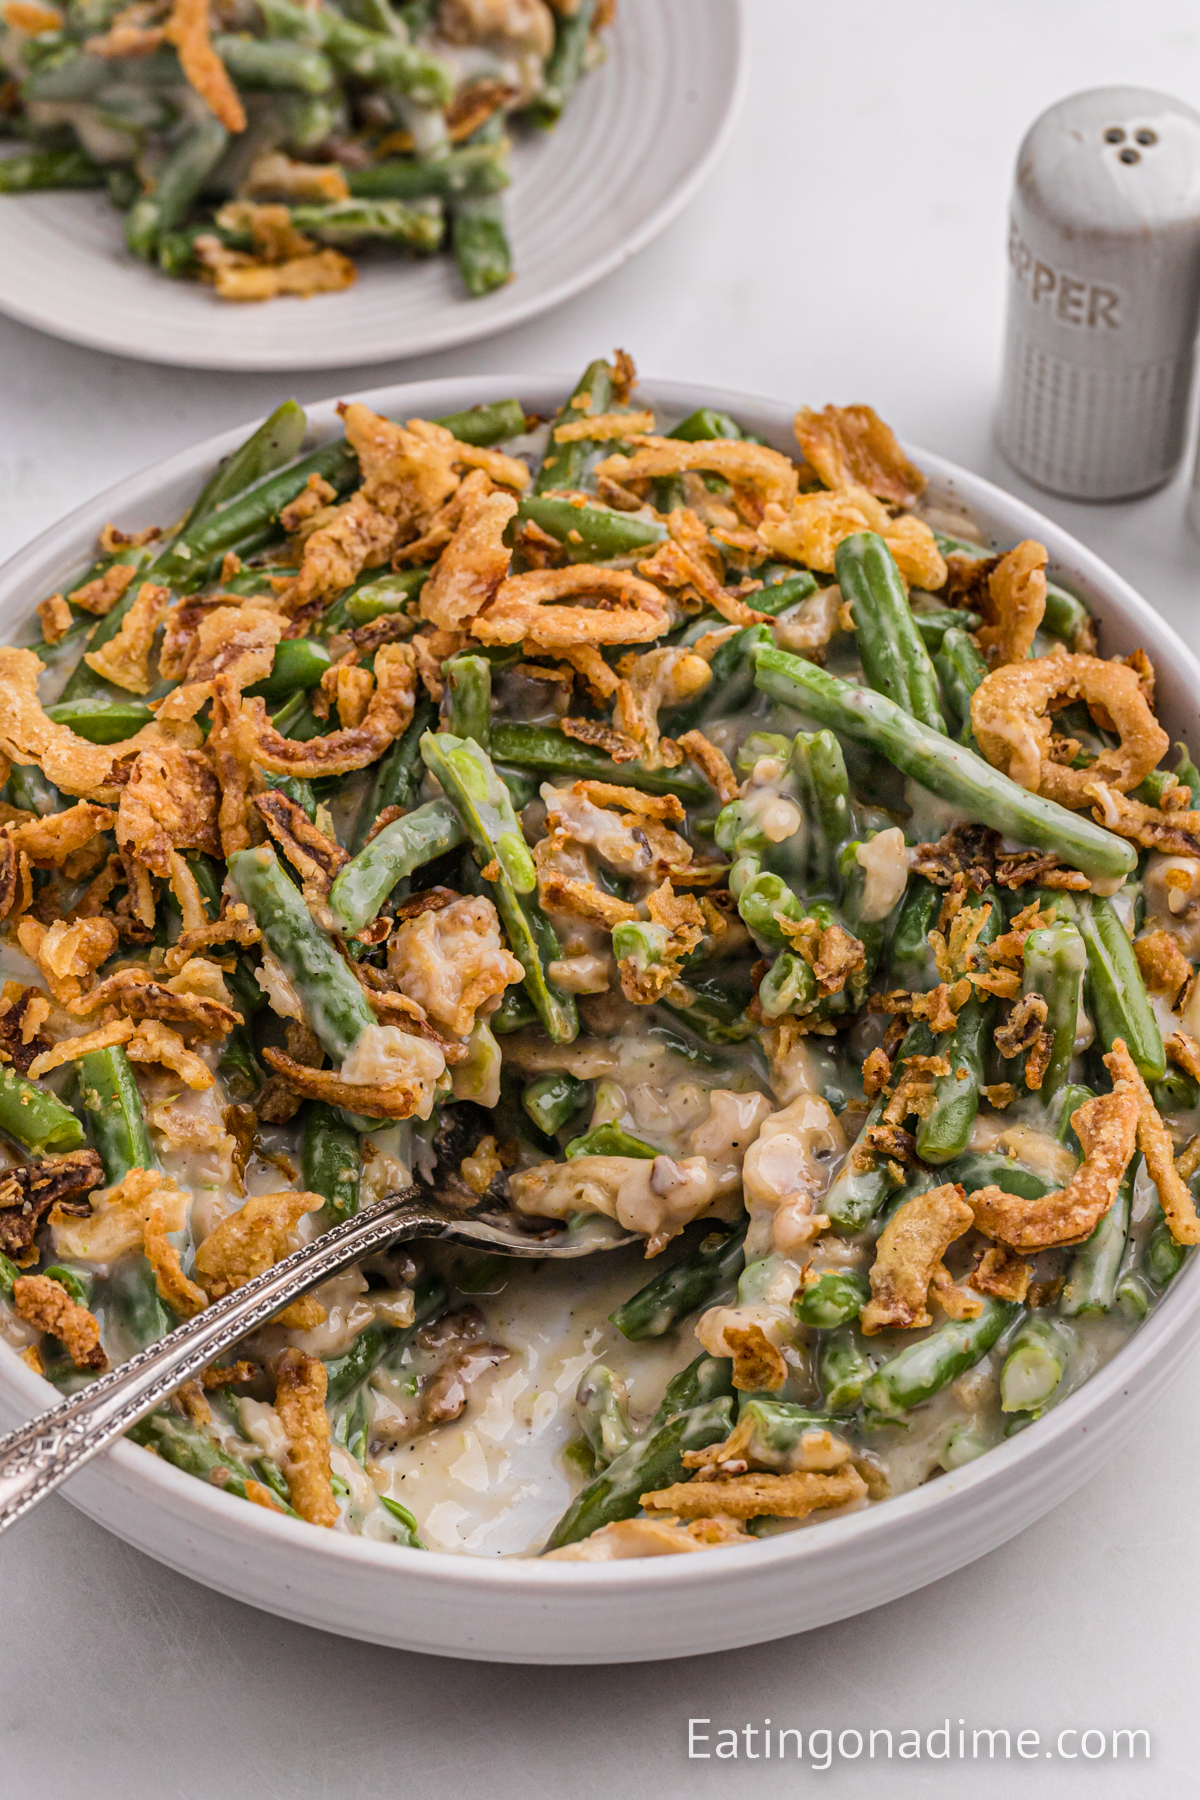 Green Bean Casserole in a white bowl with a spoon